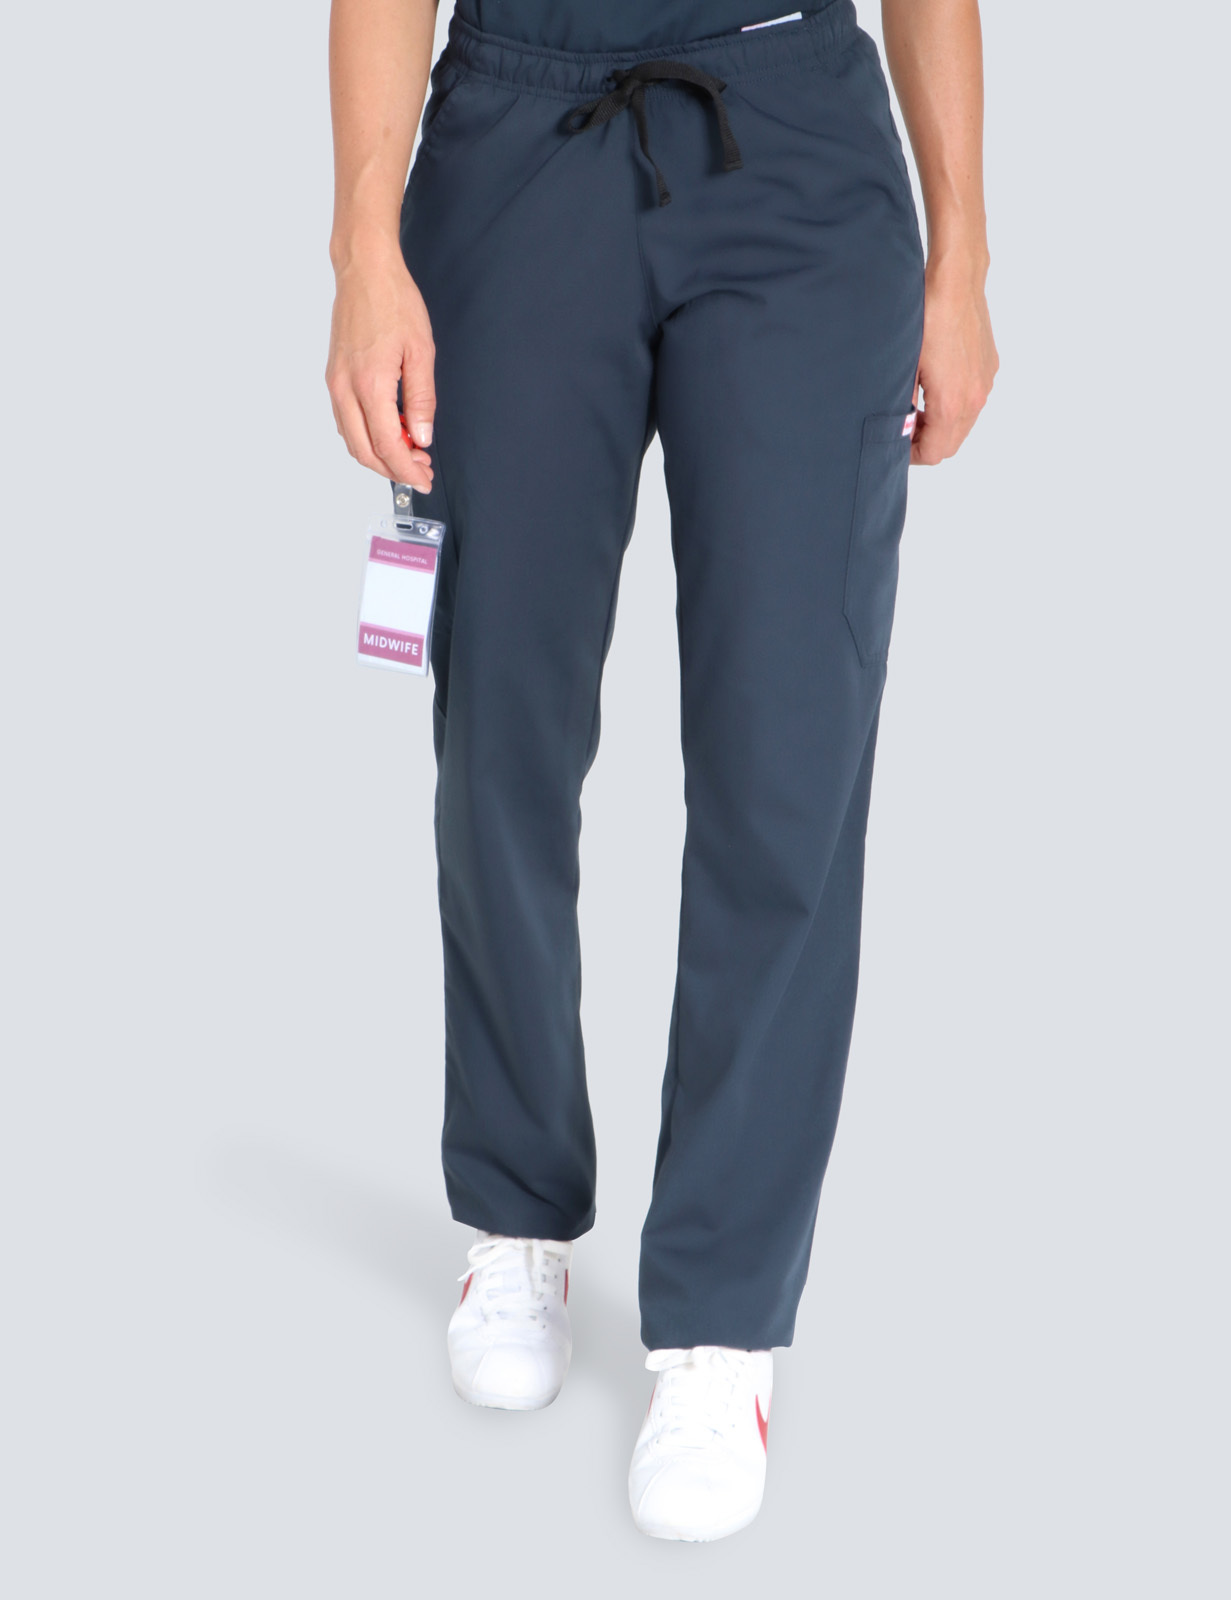 Flinders Medical Centre Emergency Department Clinical Nurse Cargo Pants Only in Hunter